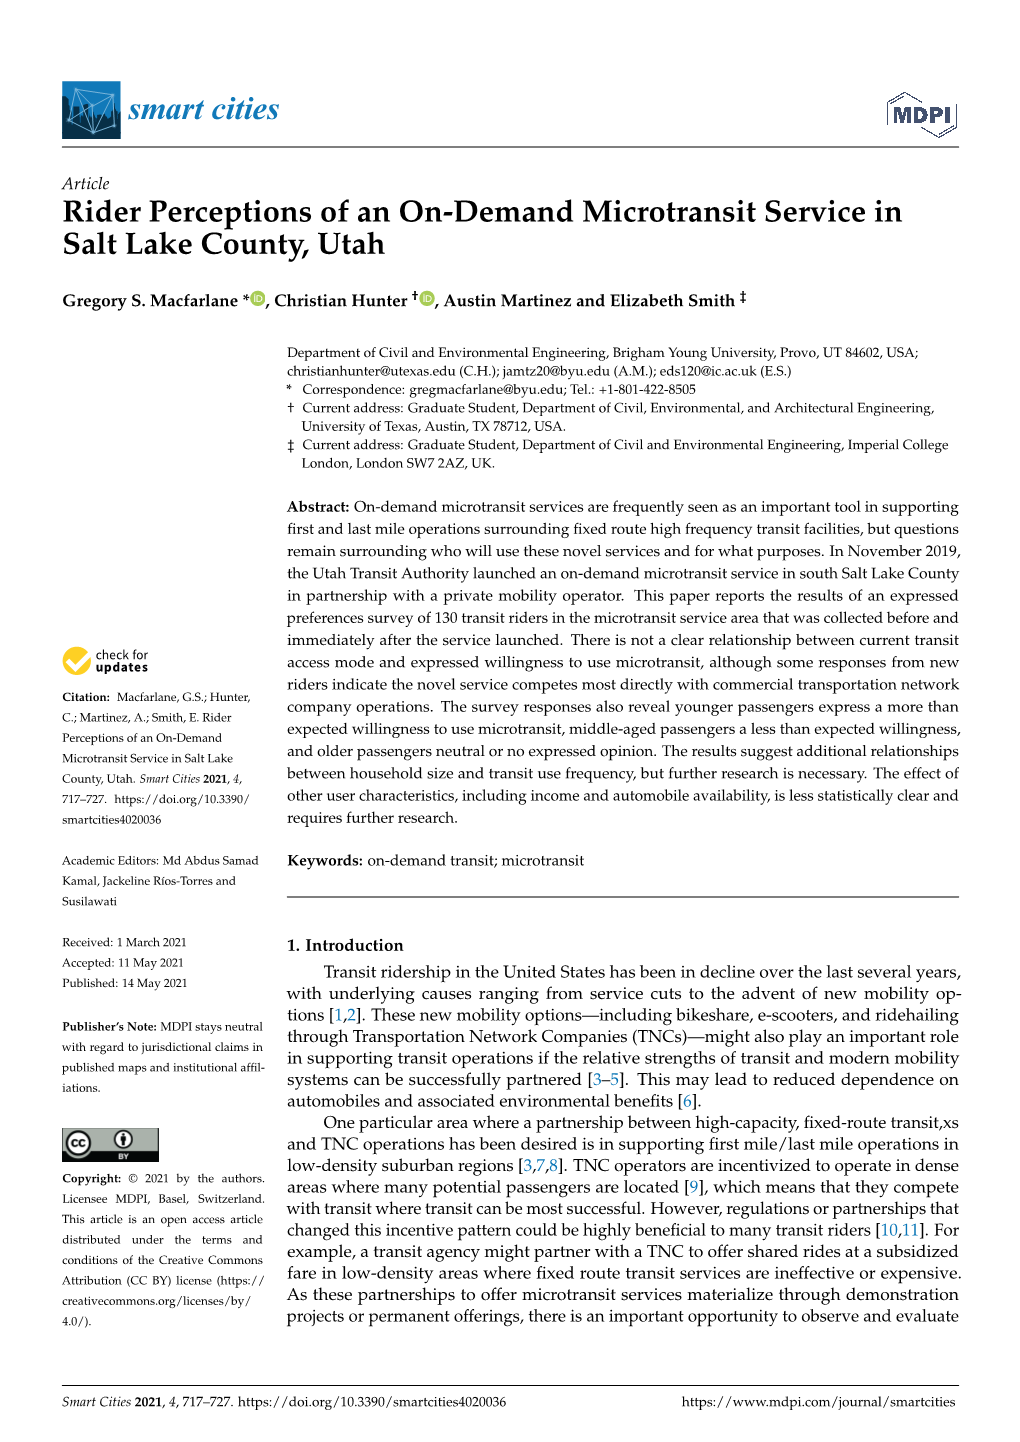 Rider Perceptions of an On-Demand Microtransit Service in Salt Lake County, Utah